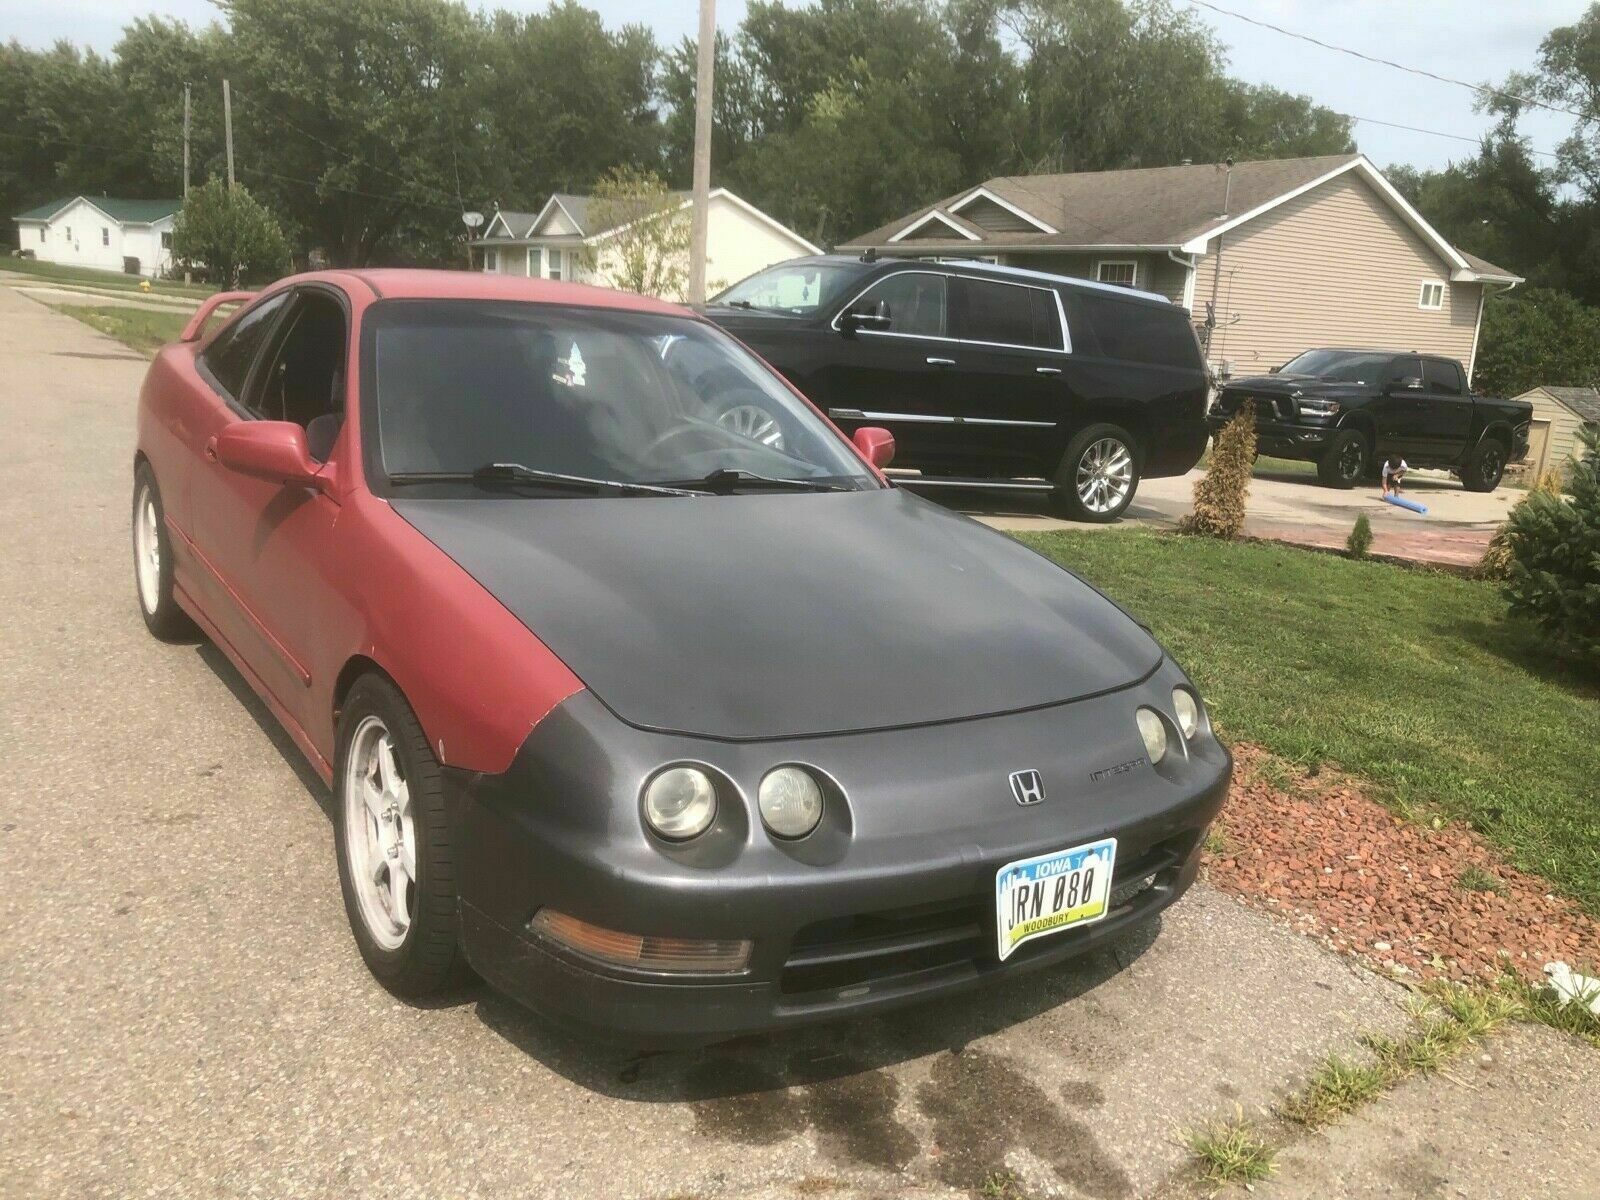 1998 Acura Integra Rs 1998 Acura Integra Hatchback Red Fwd Manual Rs